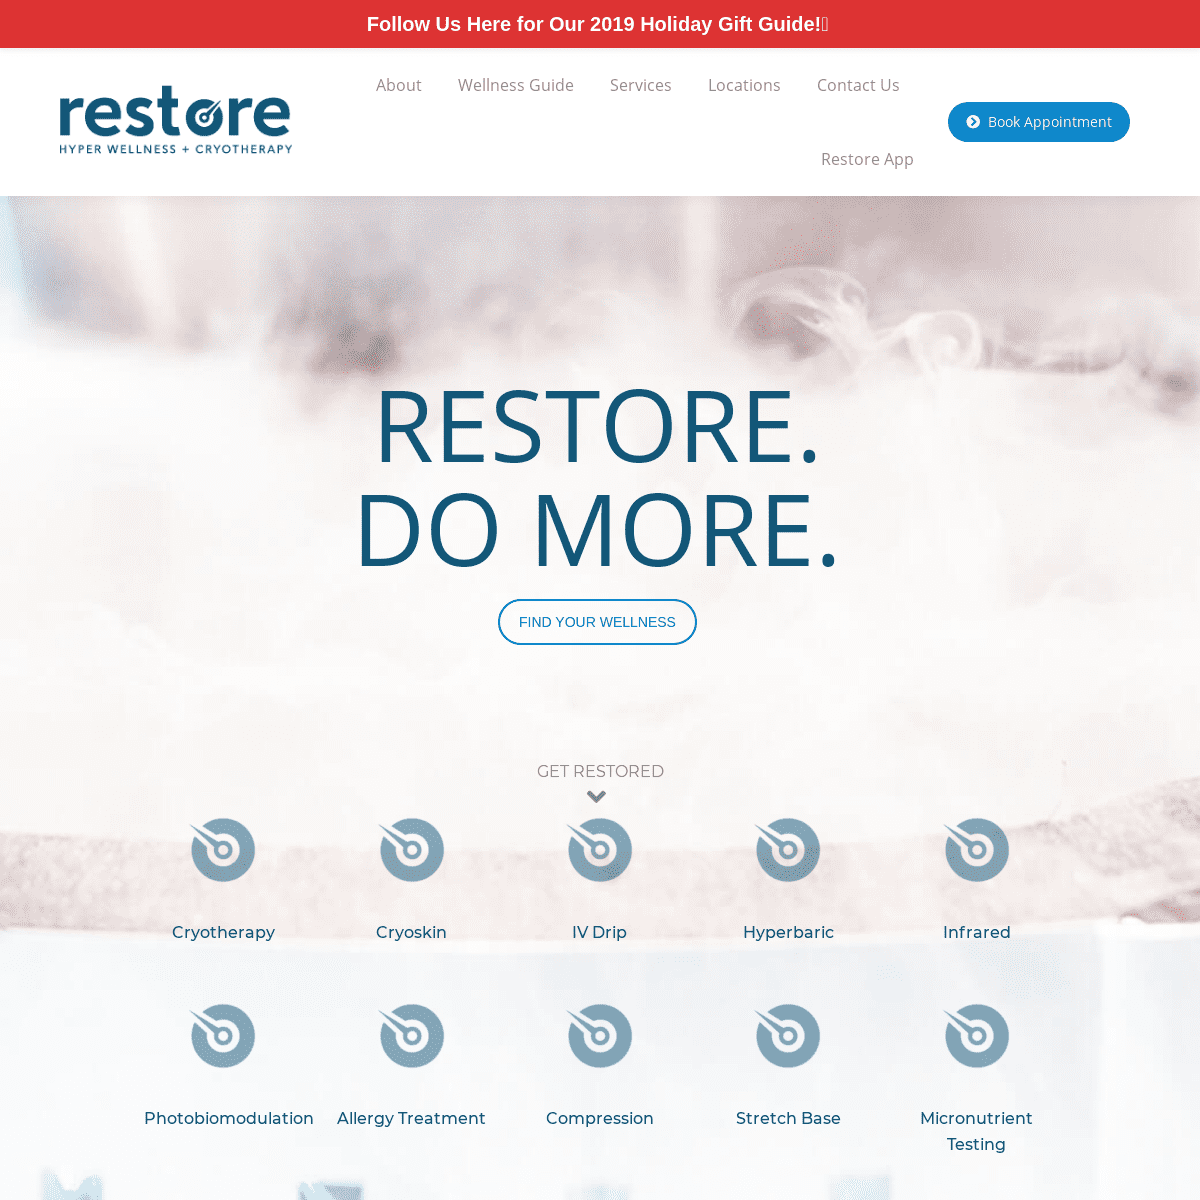 A complete backup of restorecryotherapy.com